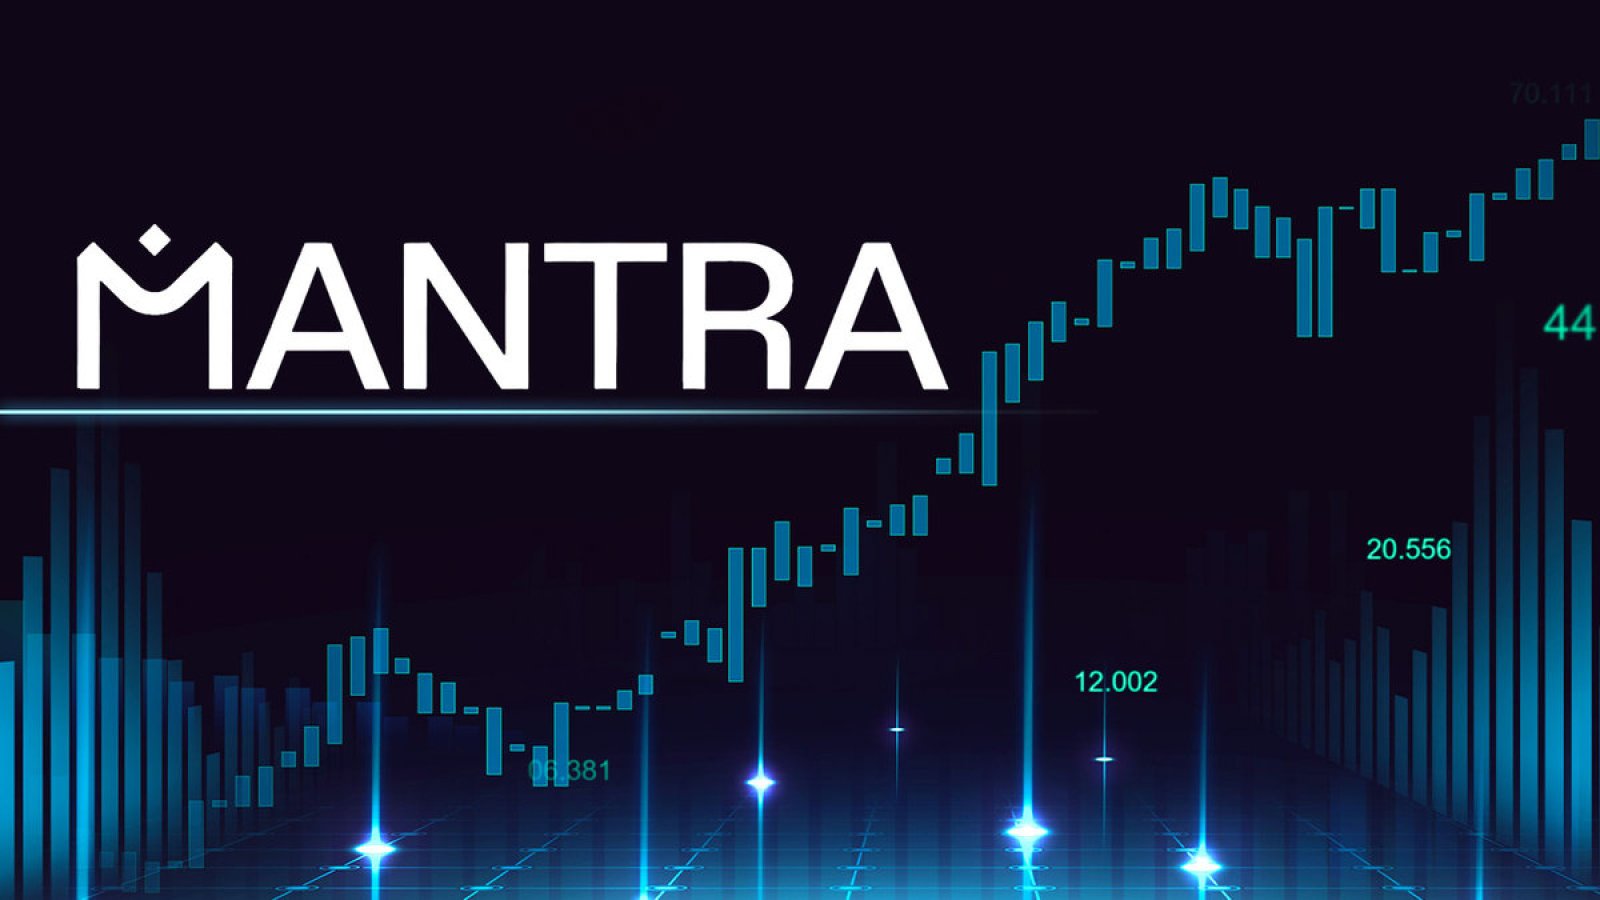 MANTRA Actively Pushing RWA Narrative to Gain Greater Market Exposure